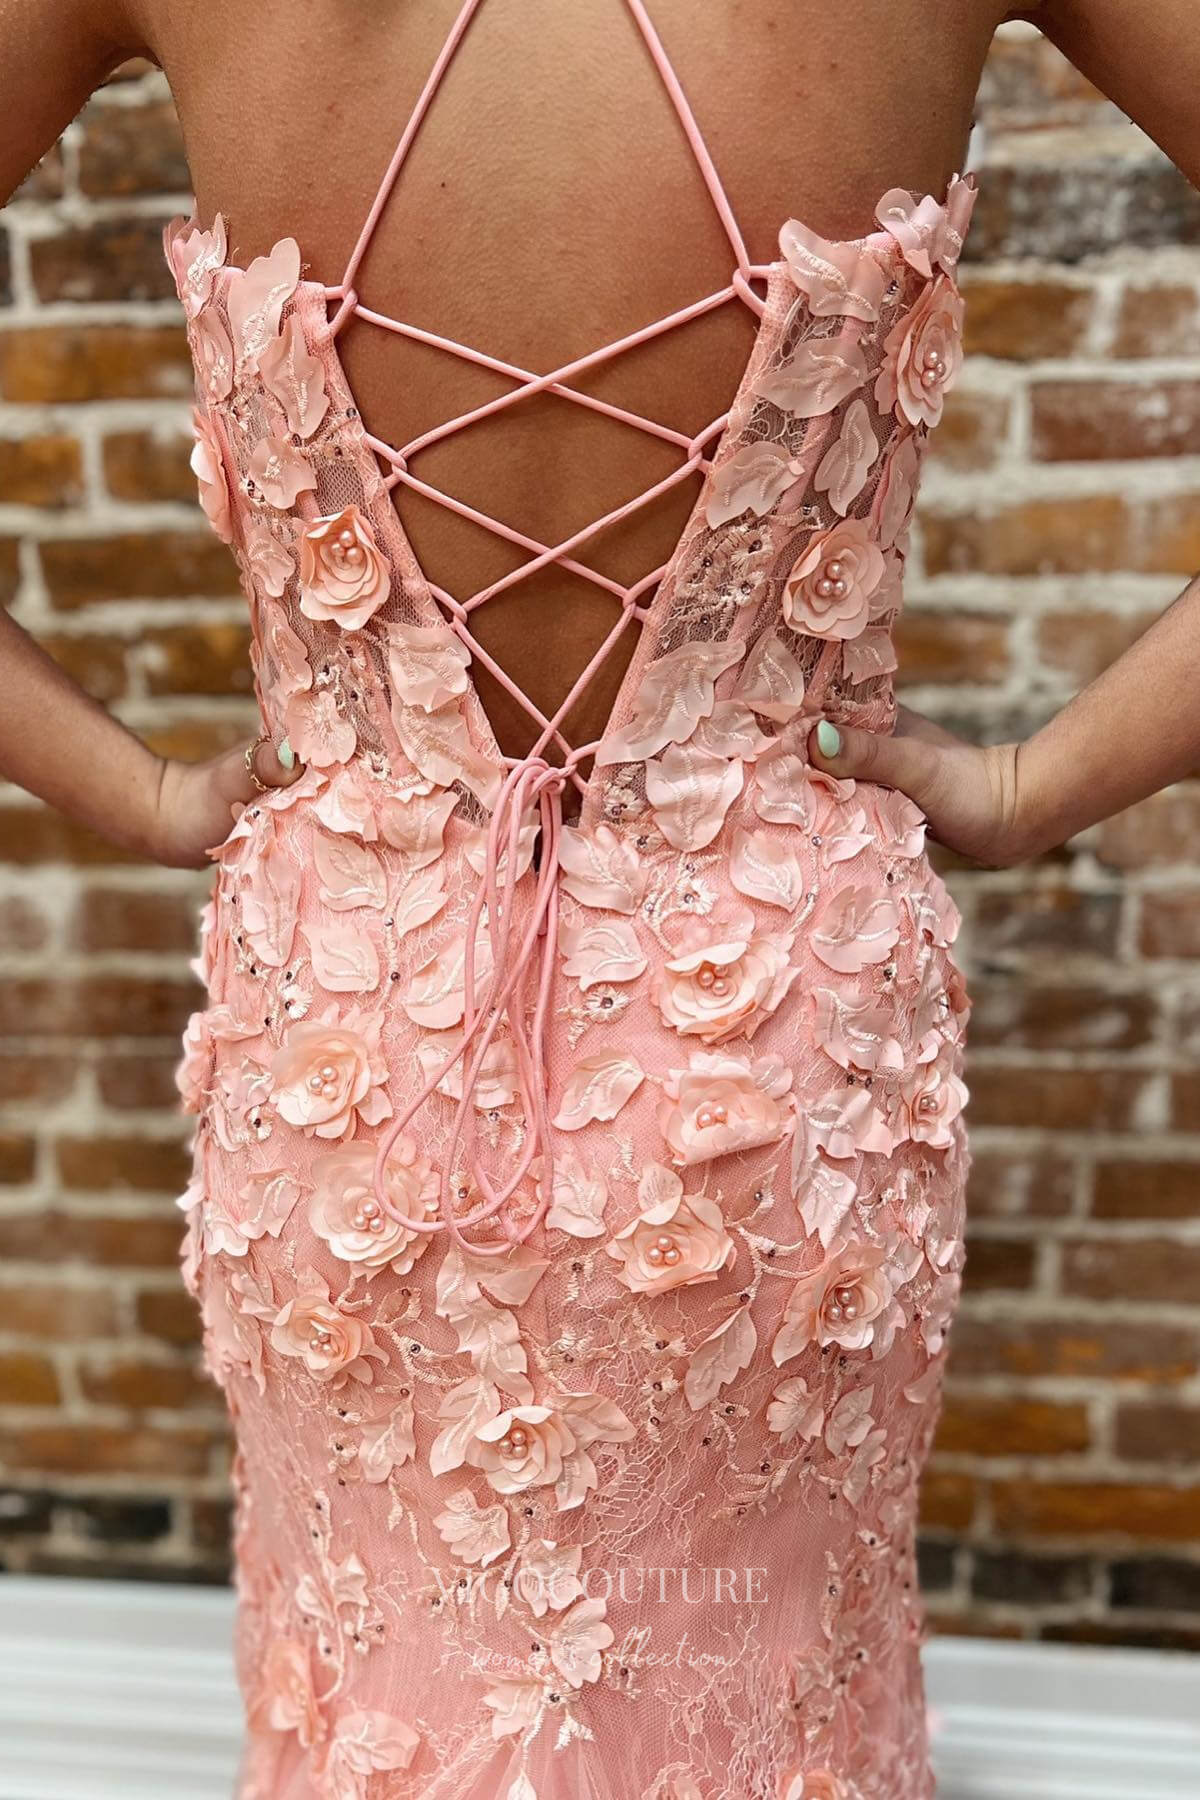 Elegant Pink Mermaid Prom Dress with Spaghetti Straps and 3D Flower Lace Applique 22195-Prom Dresses-vigocouture-Pink-Custom Size-vigocouture